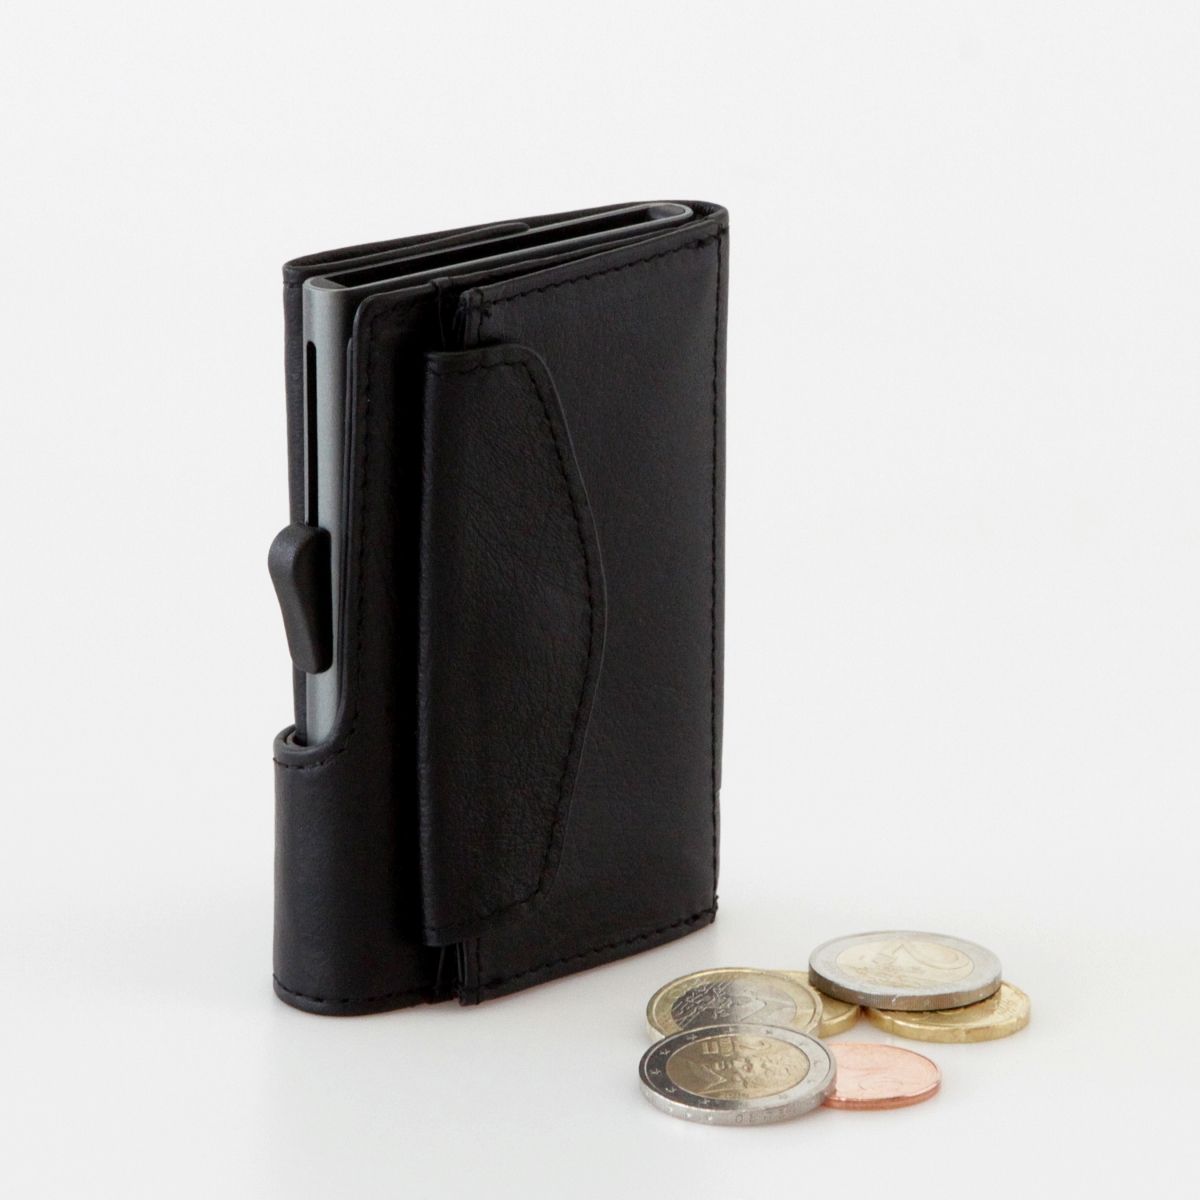 C- Secure Aluminum Card Holder with PU Leather